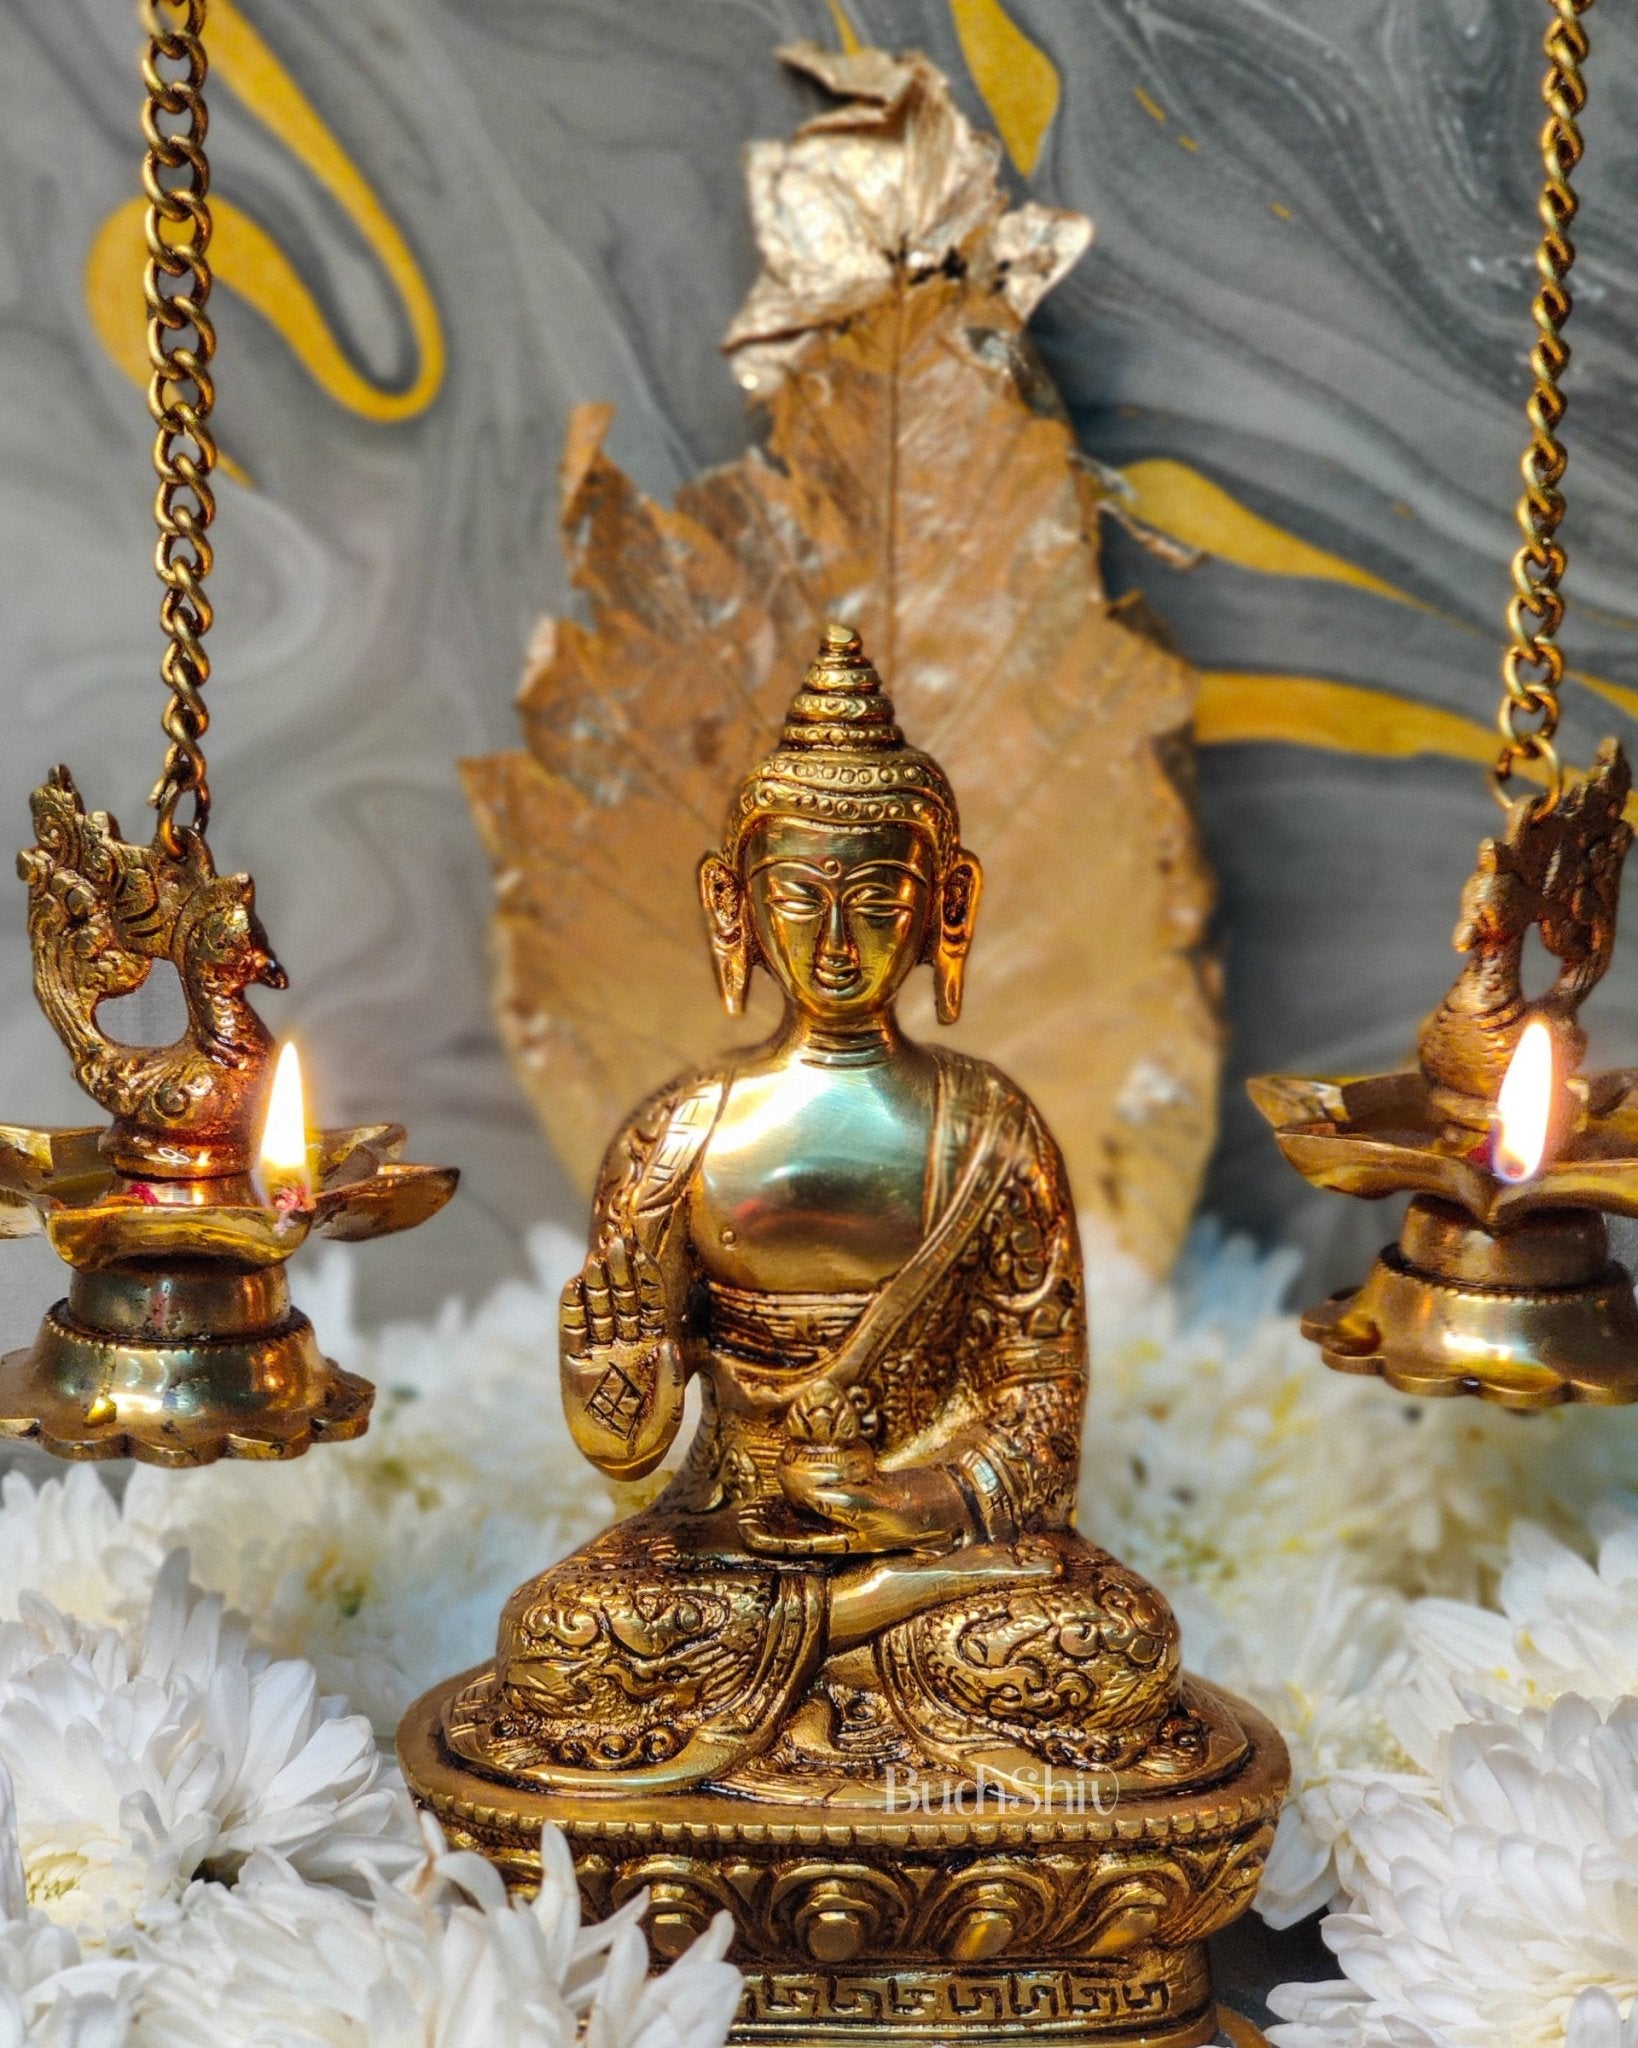 Blessing Buddha Statue: Fine Brass and Perfection Carved 7 inch - Budhshiv.com